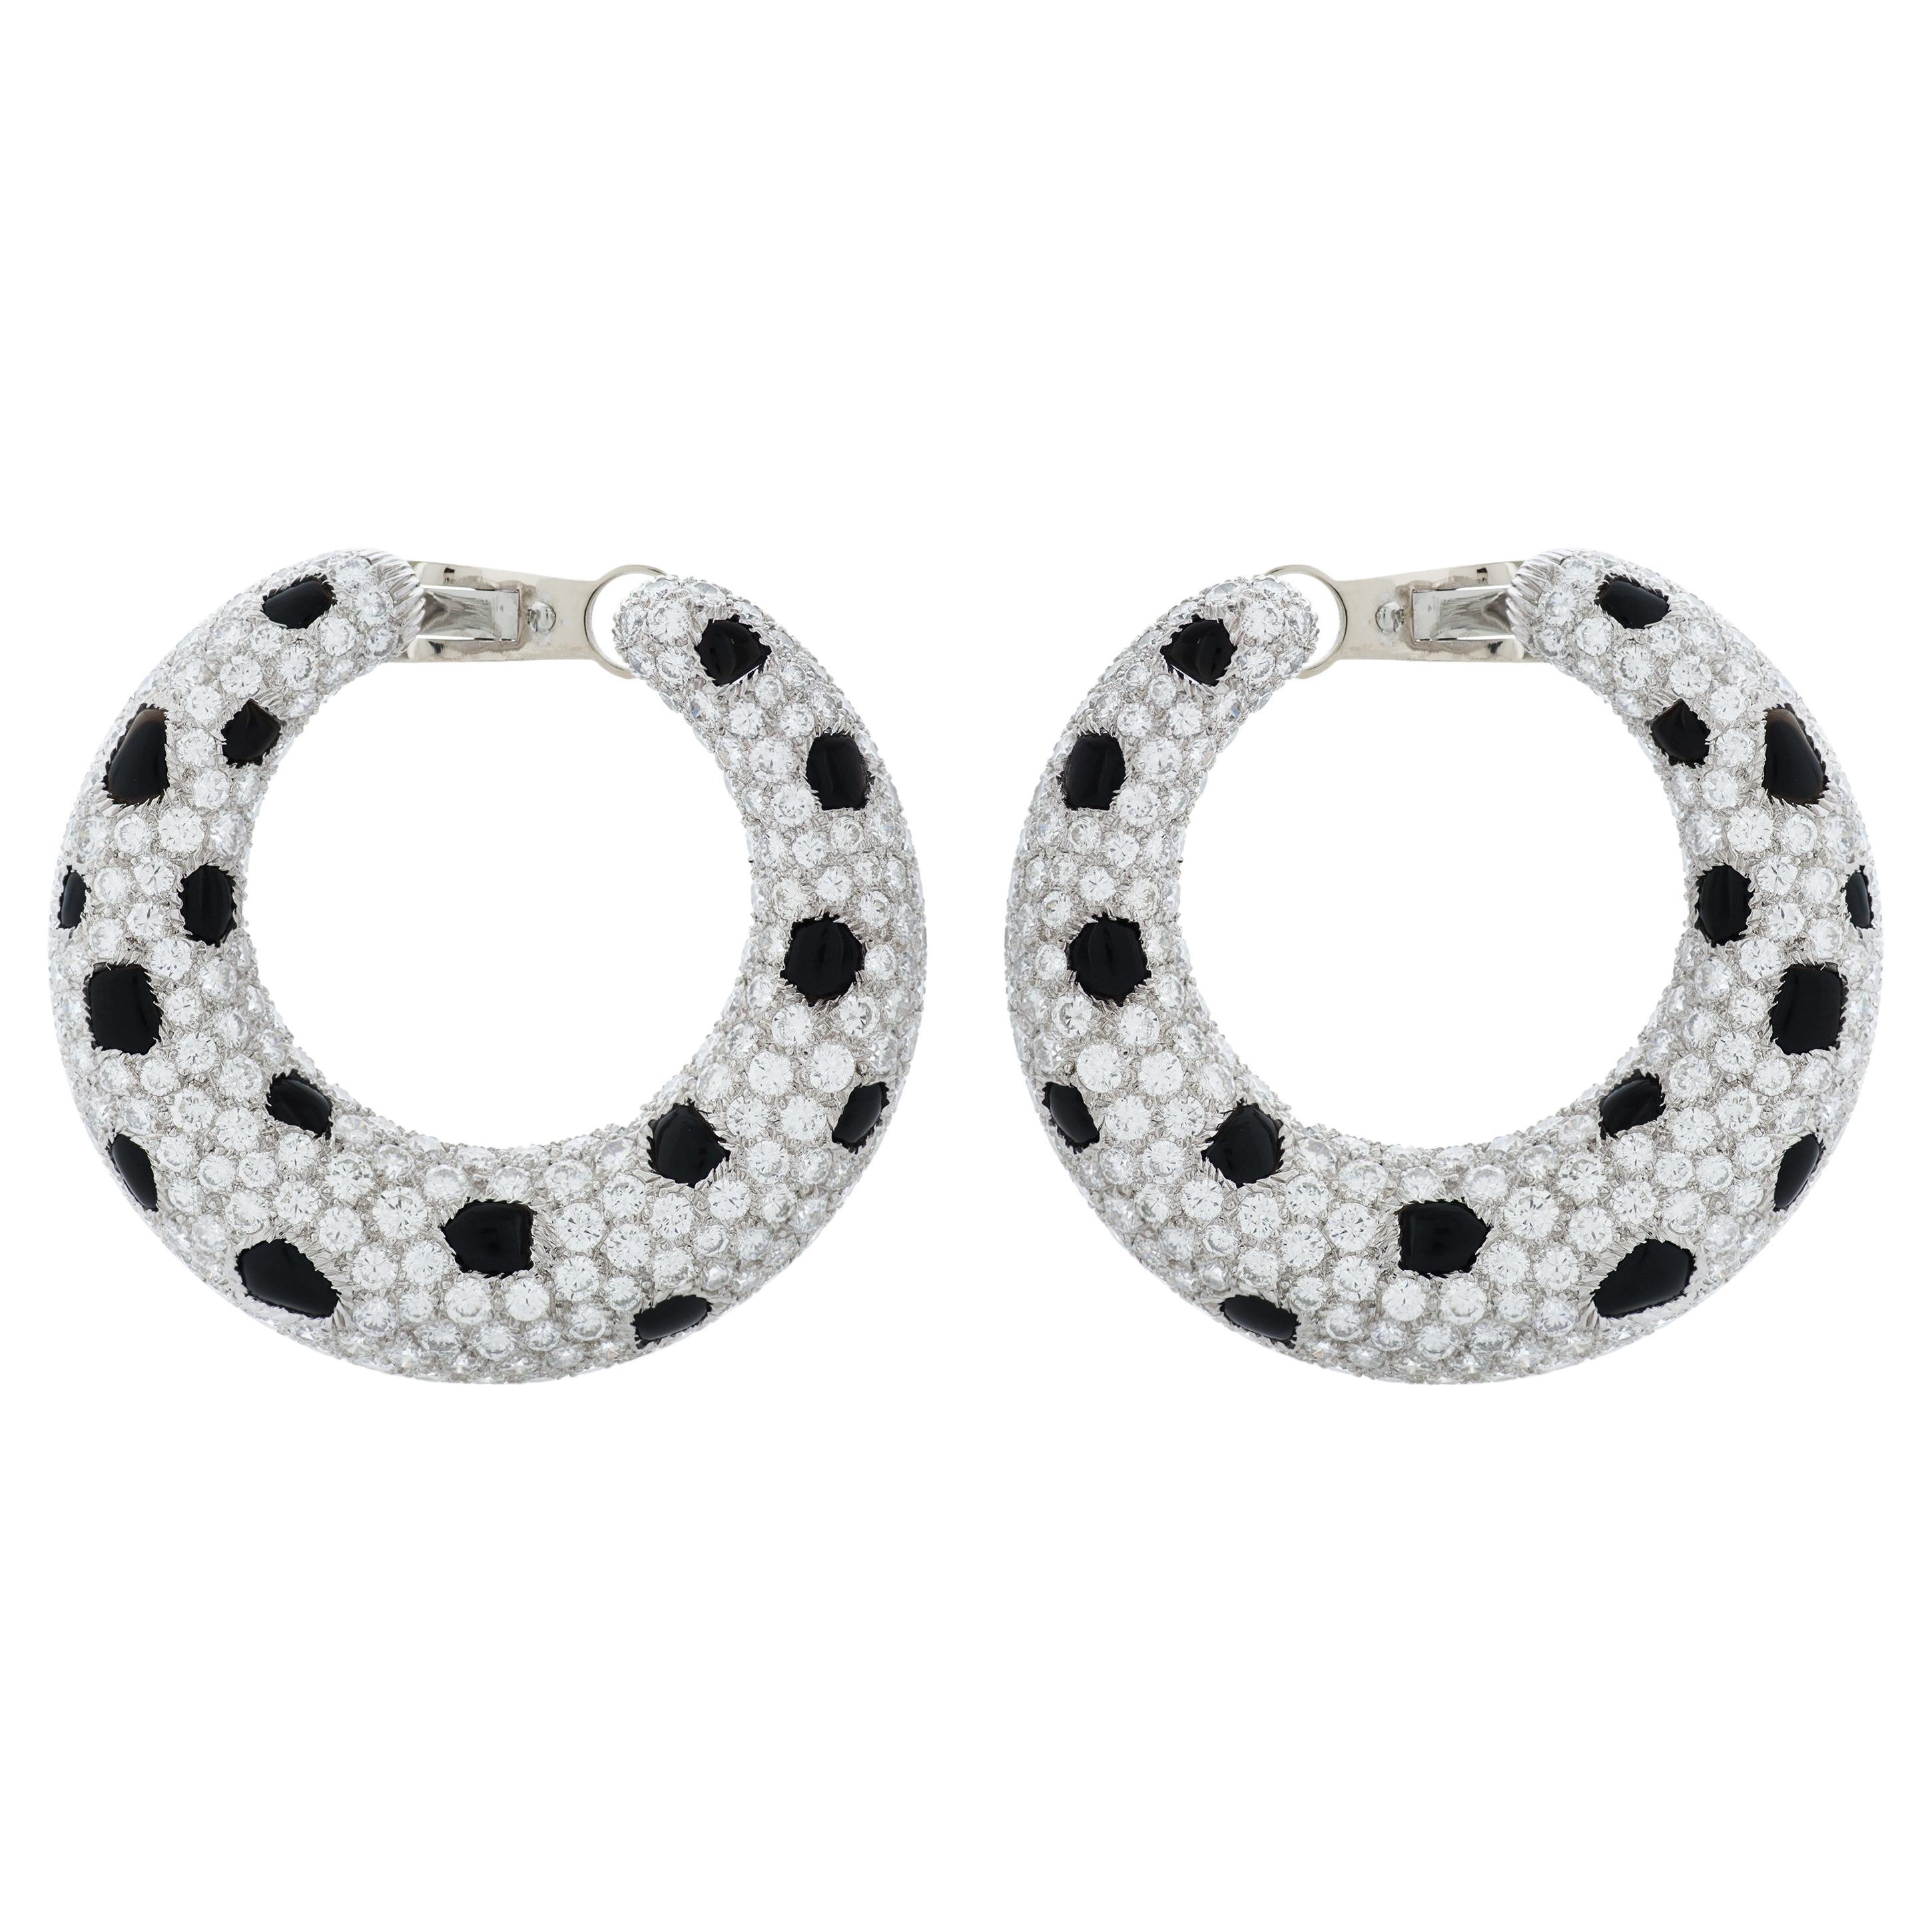 Vintage Cartier Panthere Diamond and Onyx Hoop Earrings in 18k White Gold